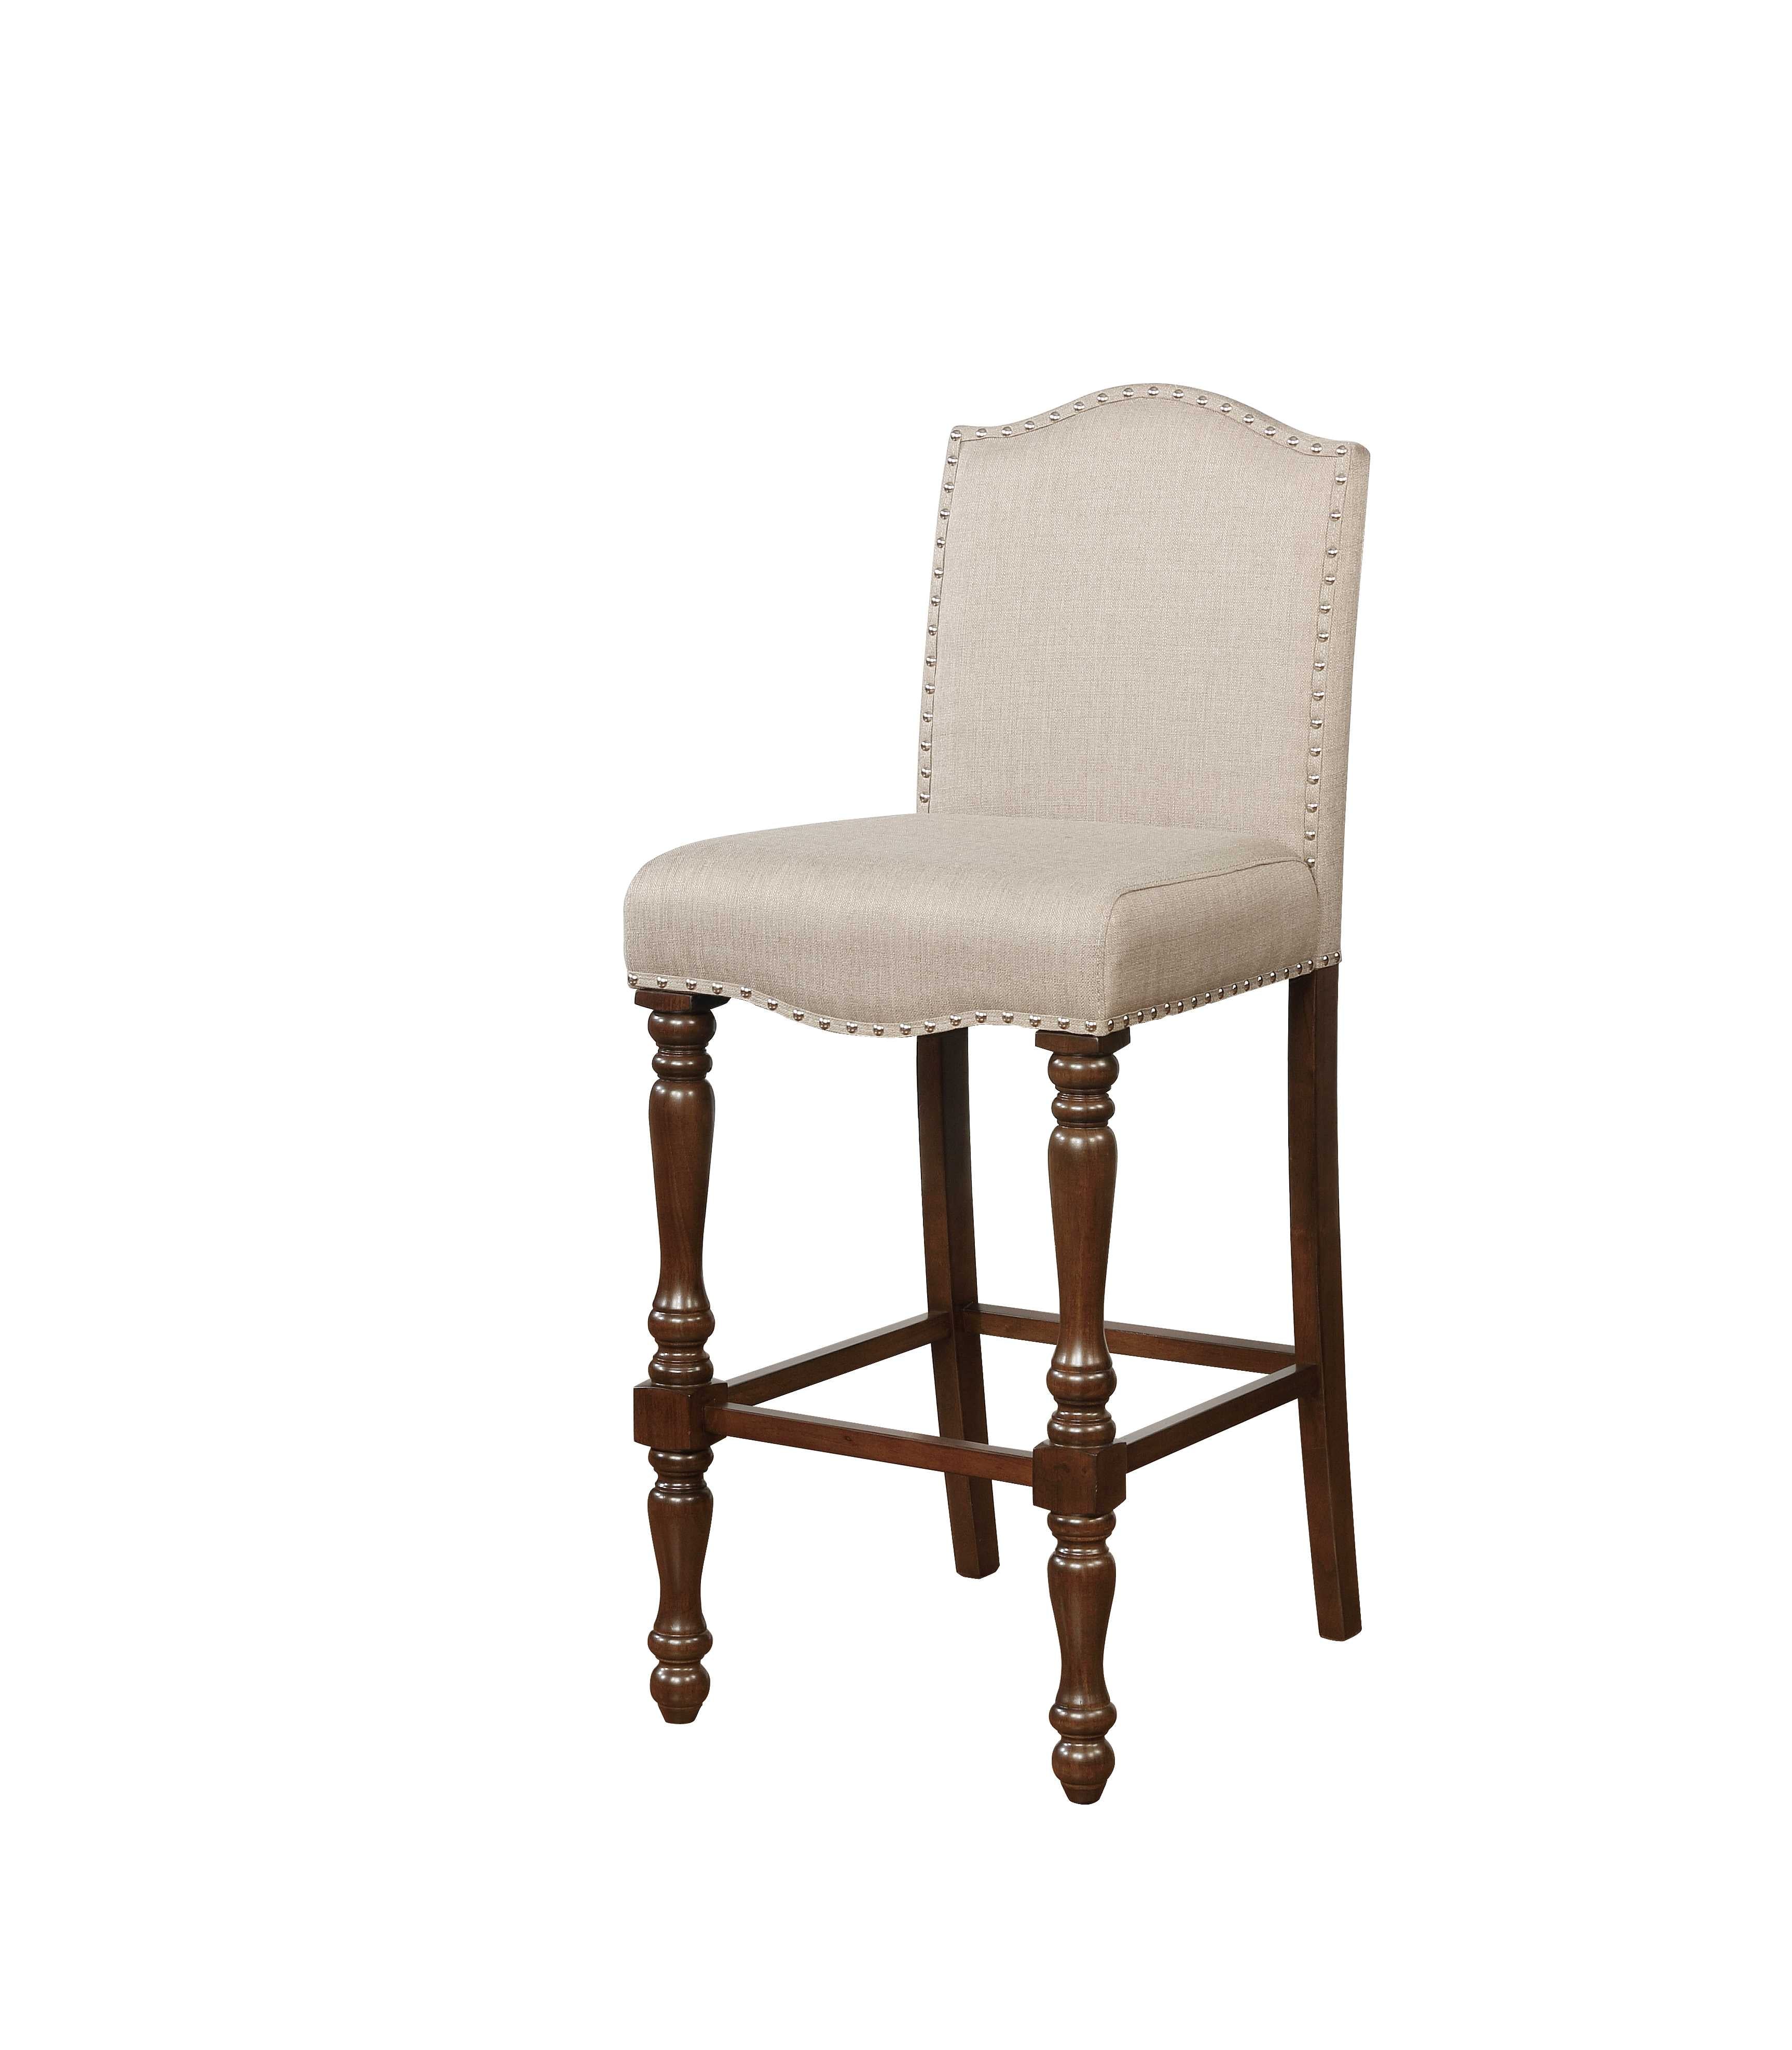 Wooden Bar Stool with Nailhead Trim Accents, Brown and Beige